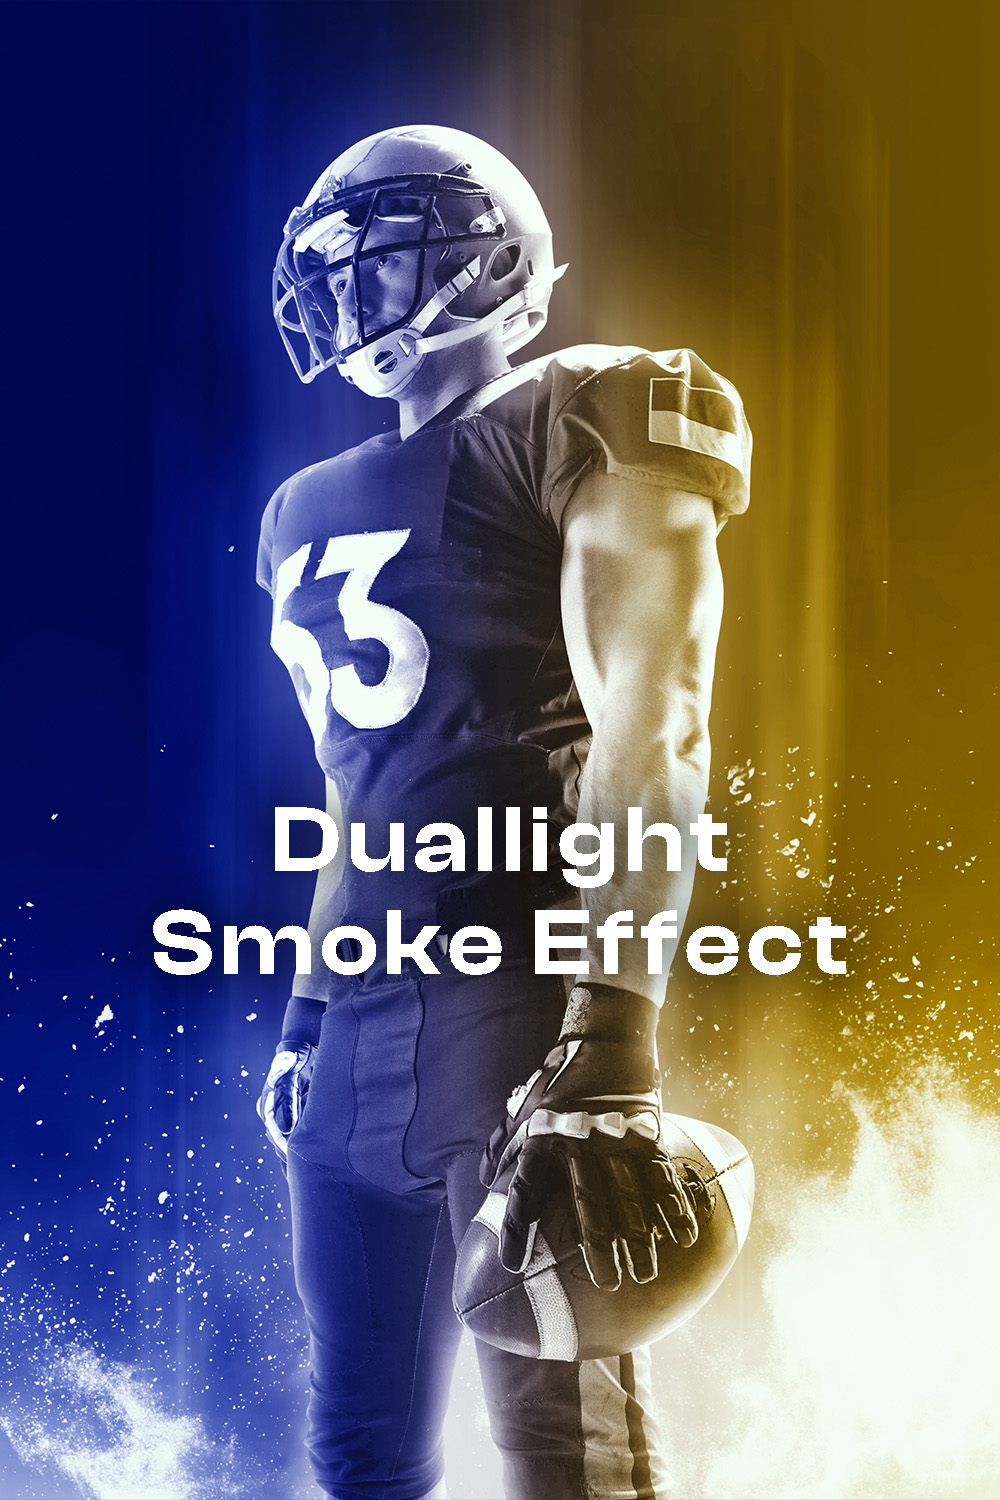 Dual light & smoke photo effects pinterest preview image.